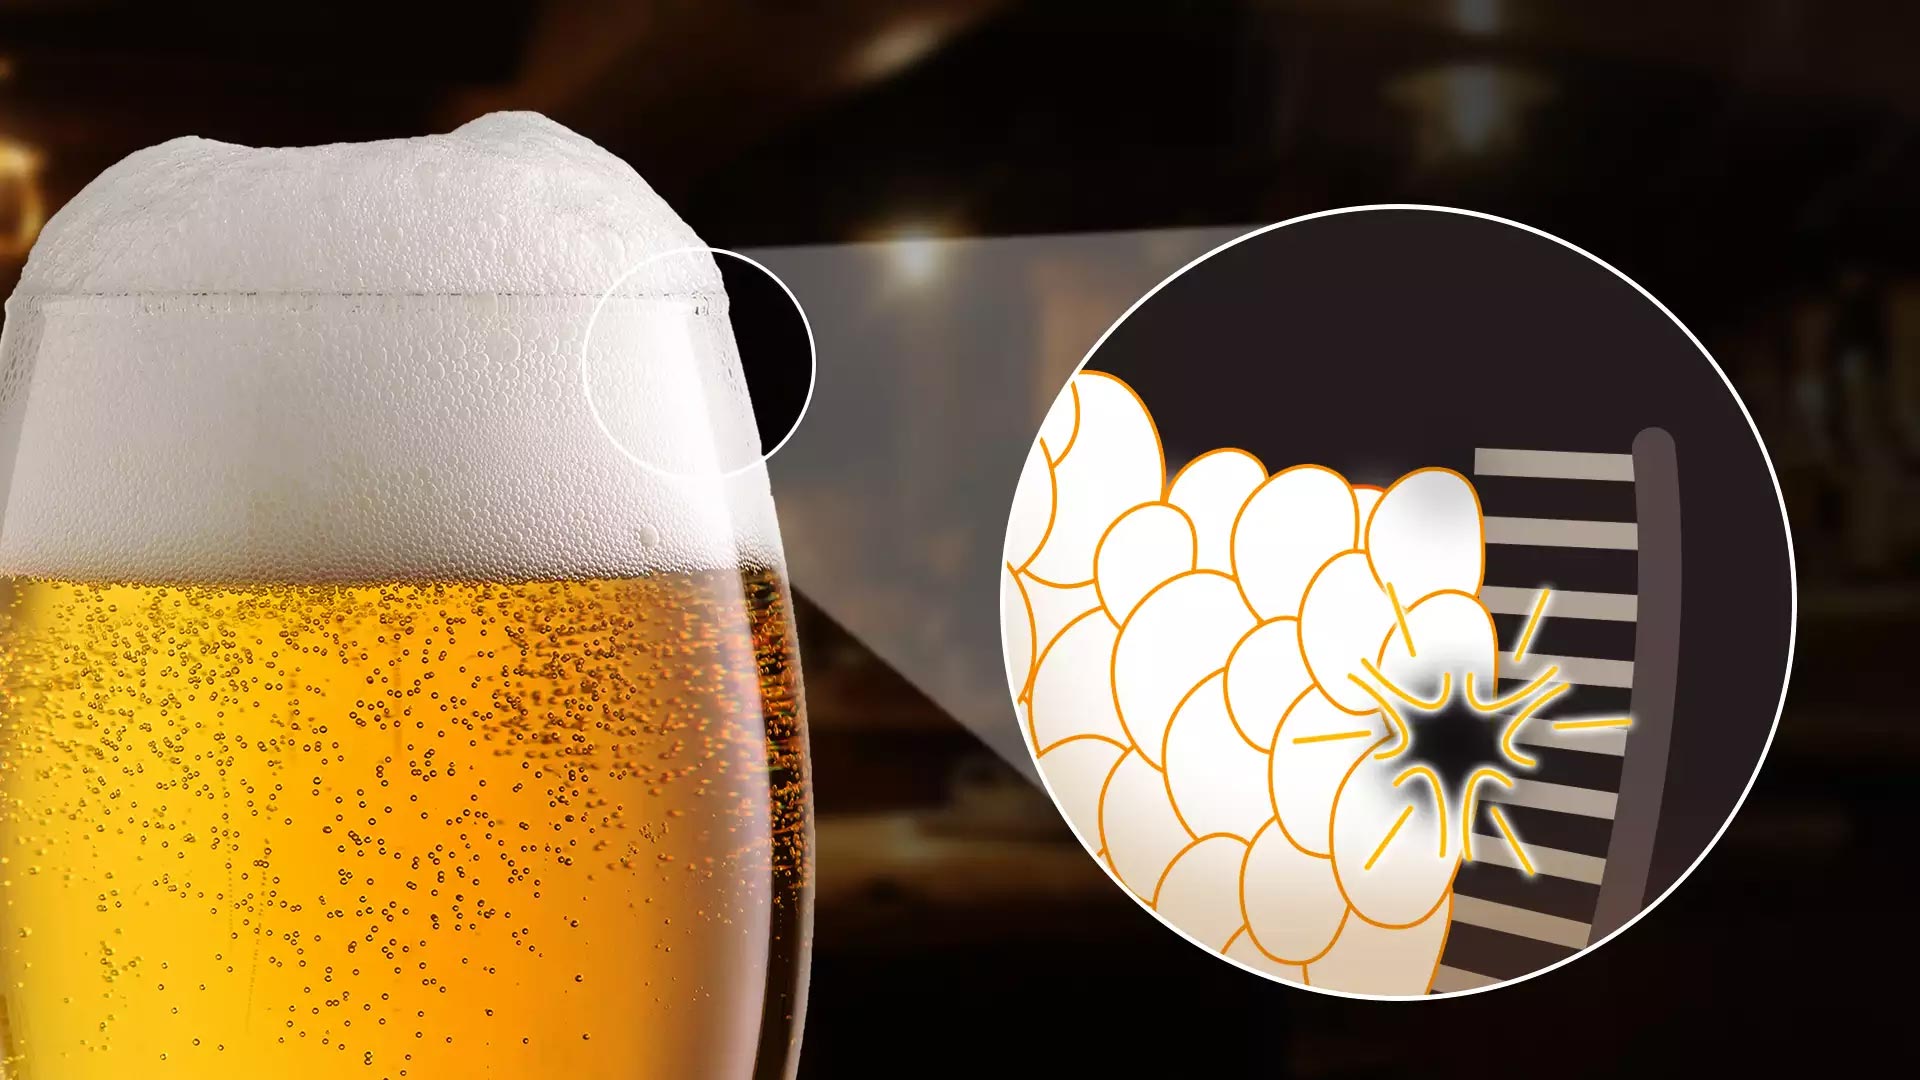 The Physics Behind the Bubble Cascade That Forms in a Glass of Guinness Beer